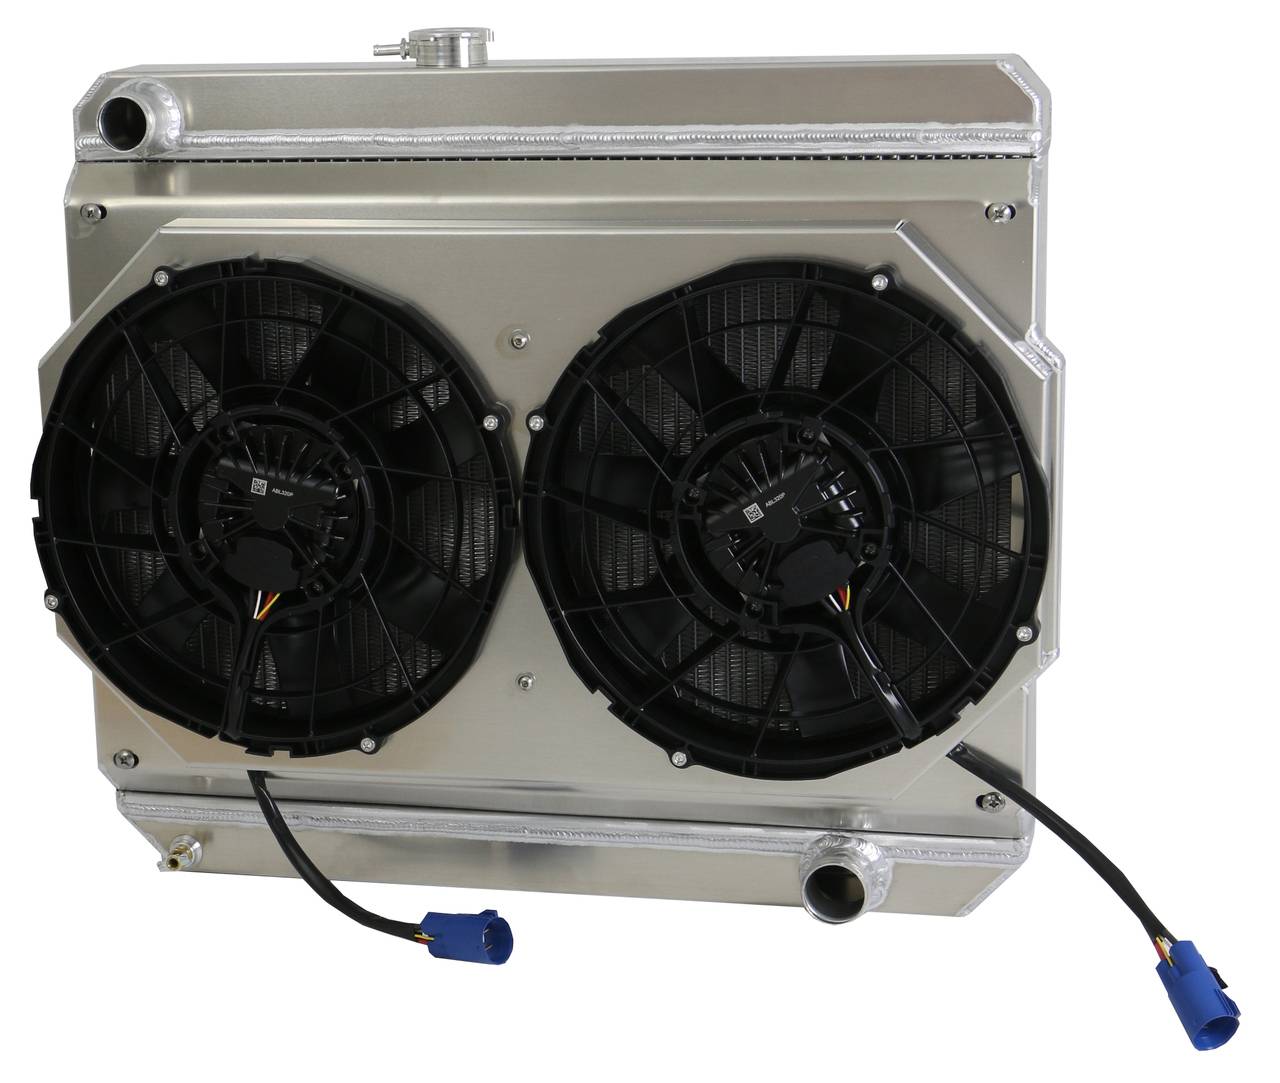 Wizard Cooling Inc - Wizard Cooling - 1966-1967 Chevrolet Bel Air/ Impala (17.5" Core, w/ Factory Air) Aluminum Radiator w/ BRUSHLESS FANS & Shroud - 27300-202BL